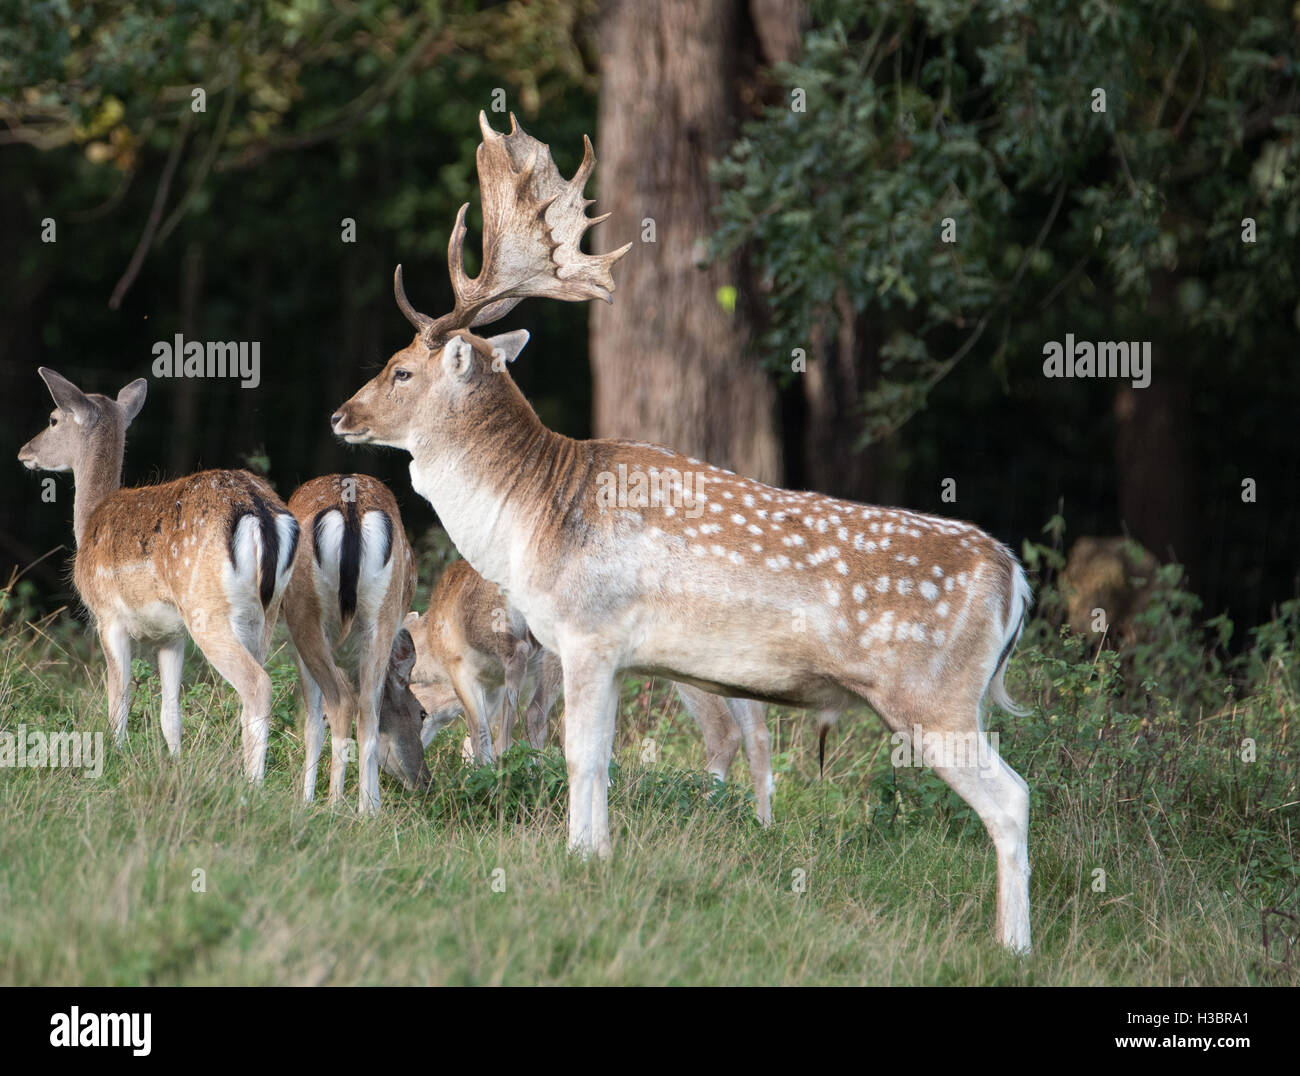 Brentwood, 5th October 2016, Deer in park at Brentwood Stock Photo